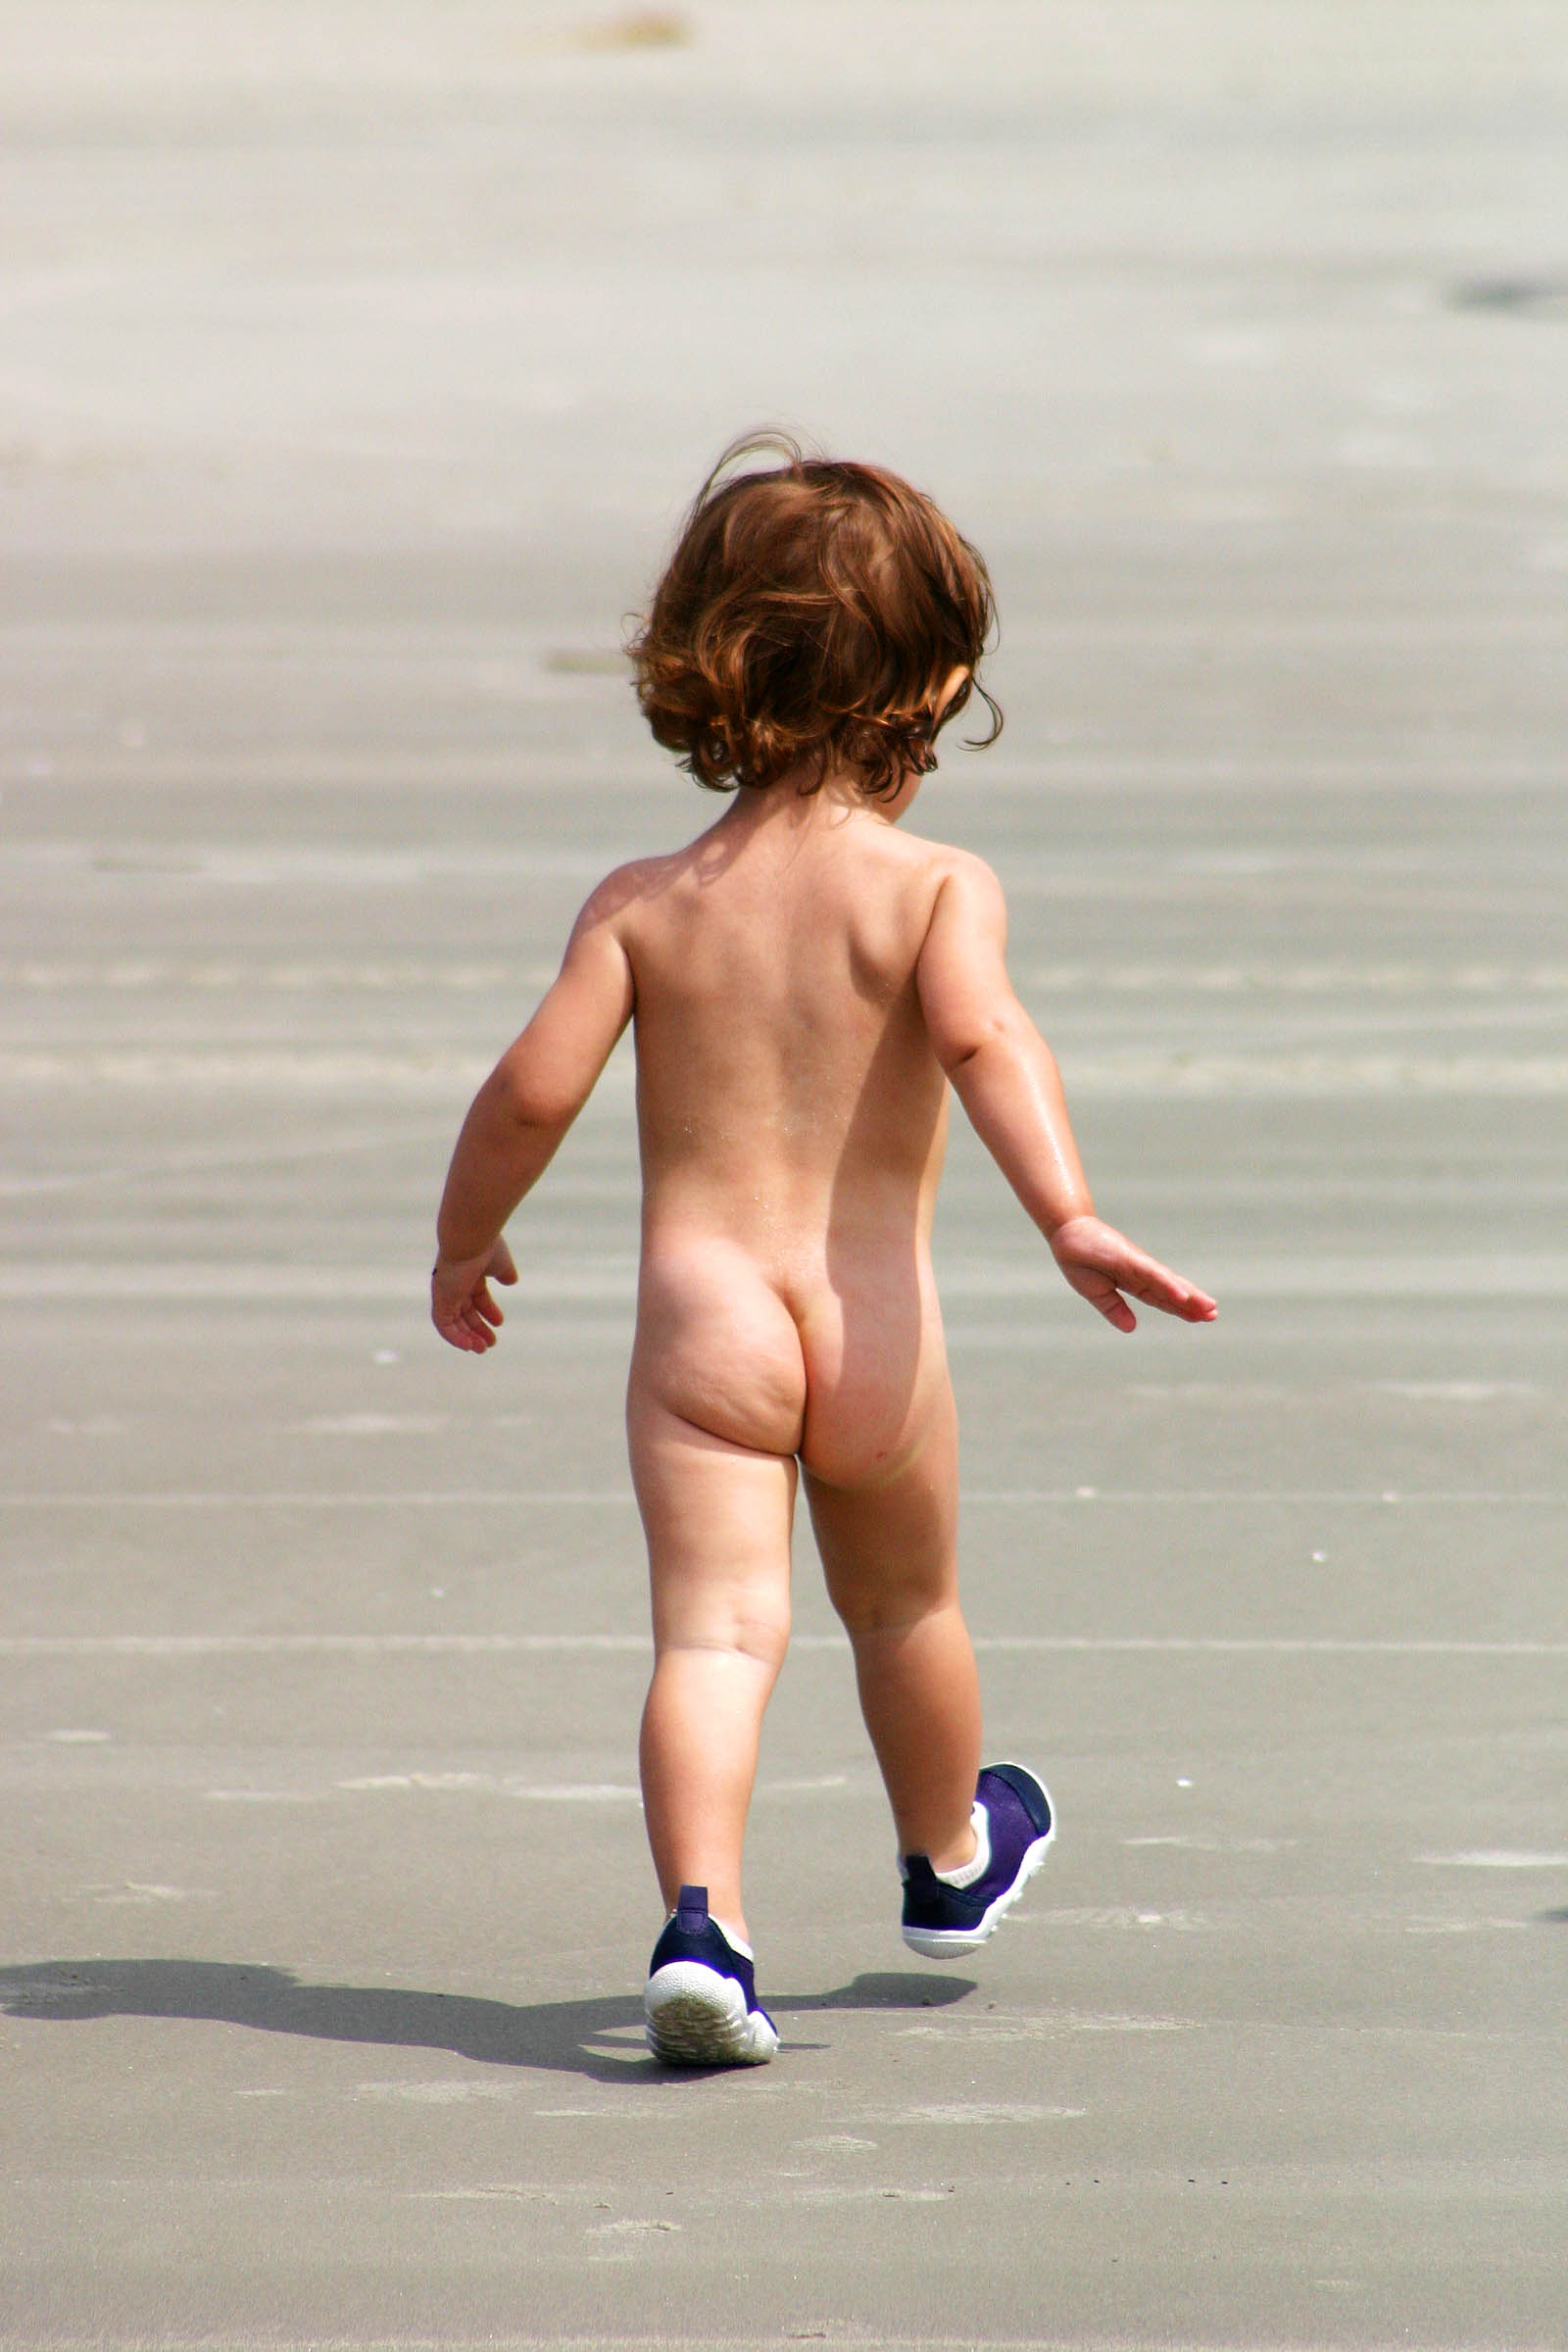 Keep Your Toddler From Taking Off Their Diaper or Clothes